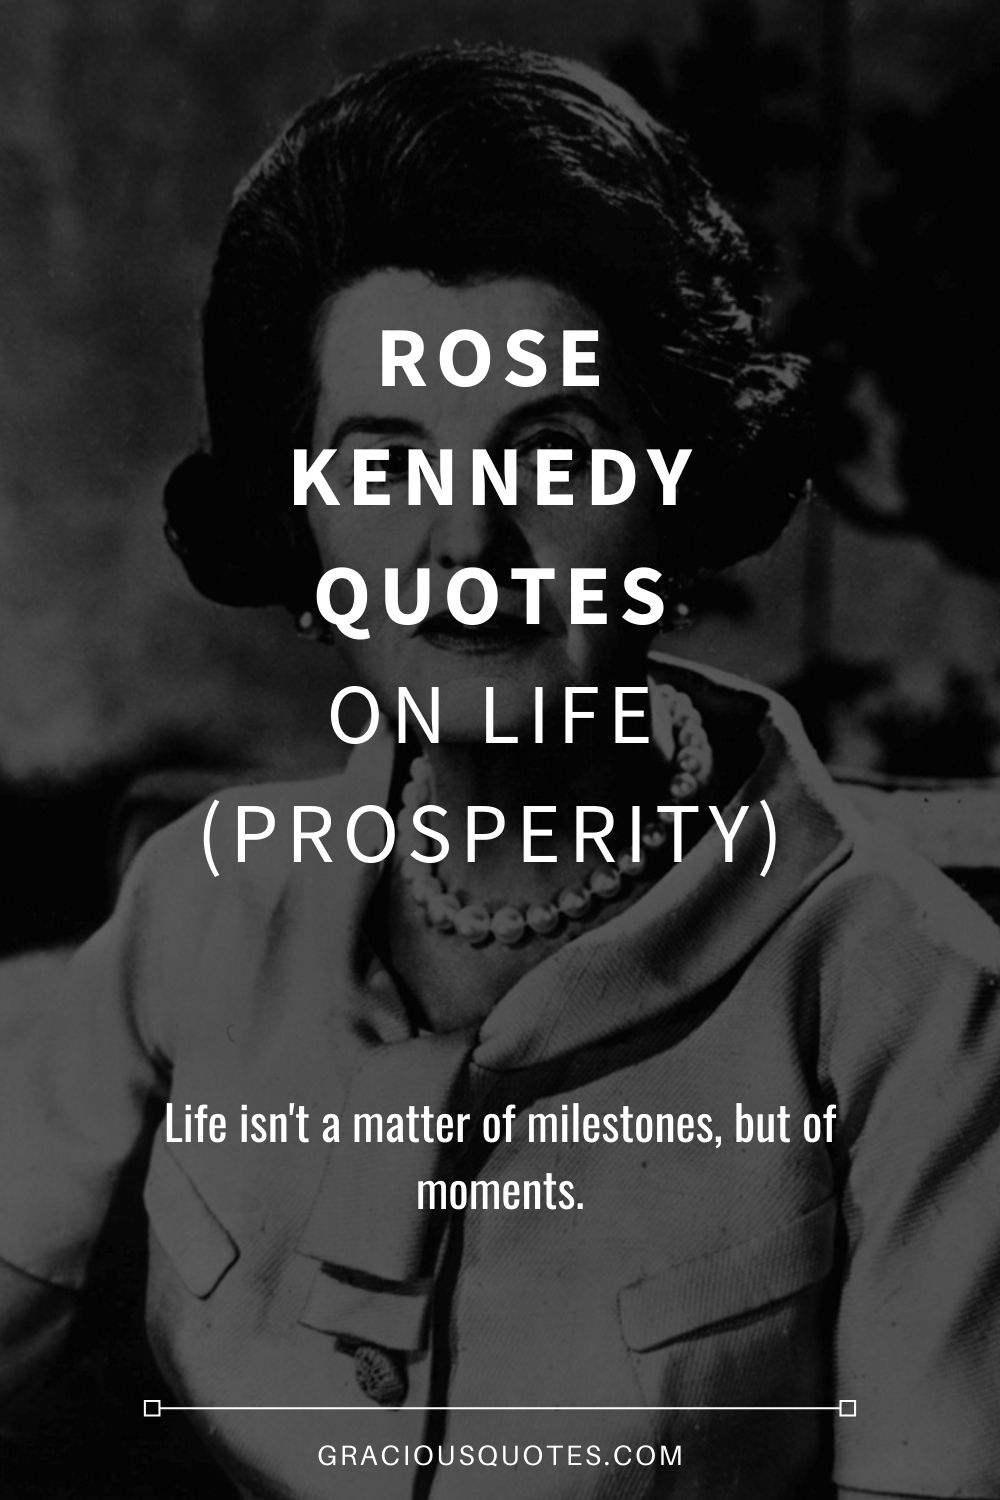 Rose Kennedy Quotes on Life (PROSPERITY) - Gracious Quotes